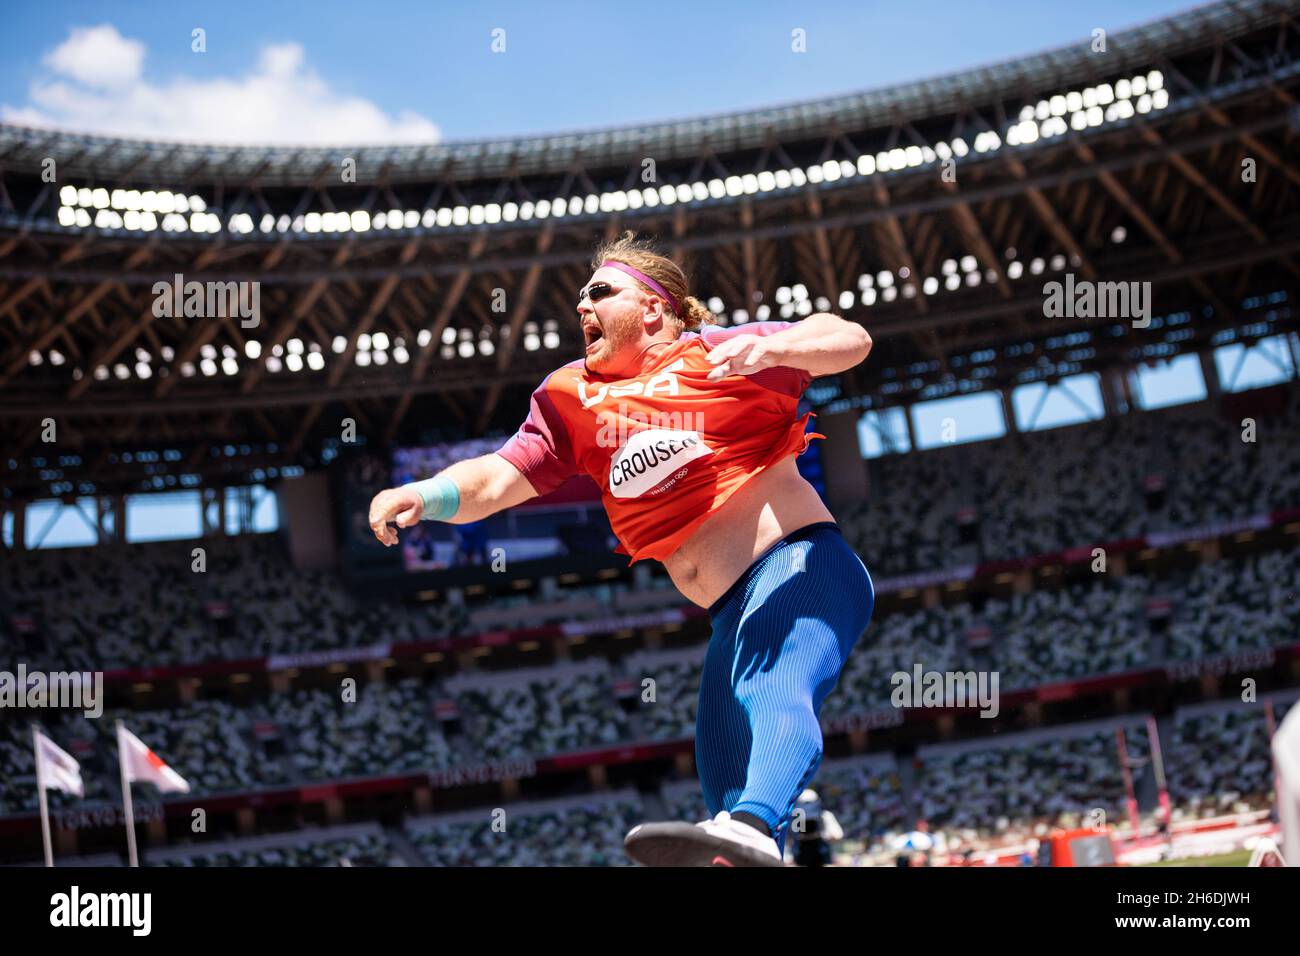 Ryan Crouser of the United States wins gold in the Tokyo Olympics 2020 Stock Photo